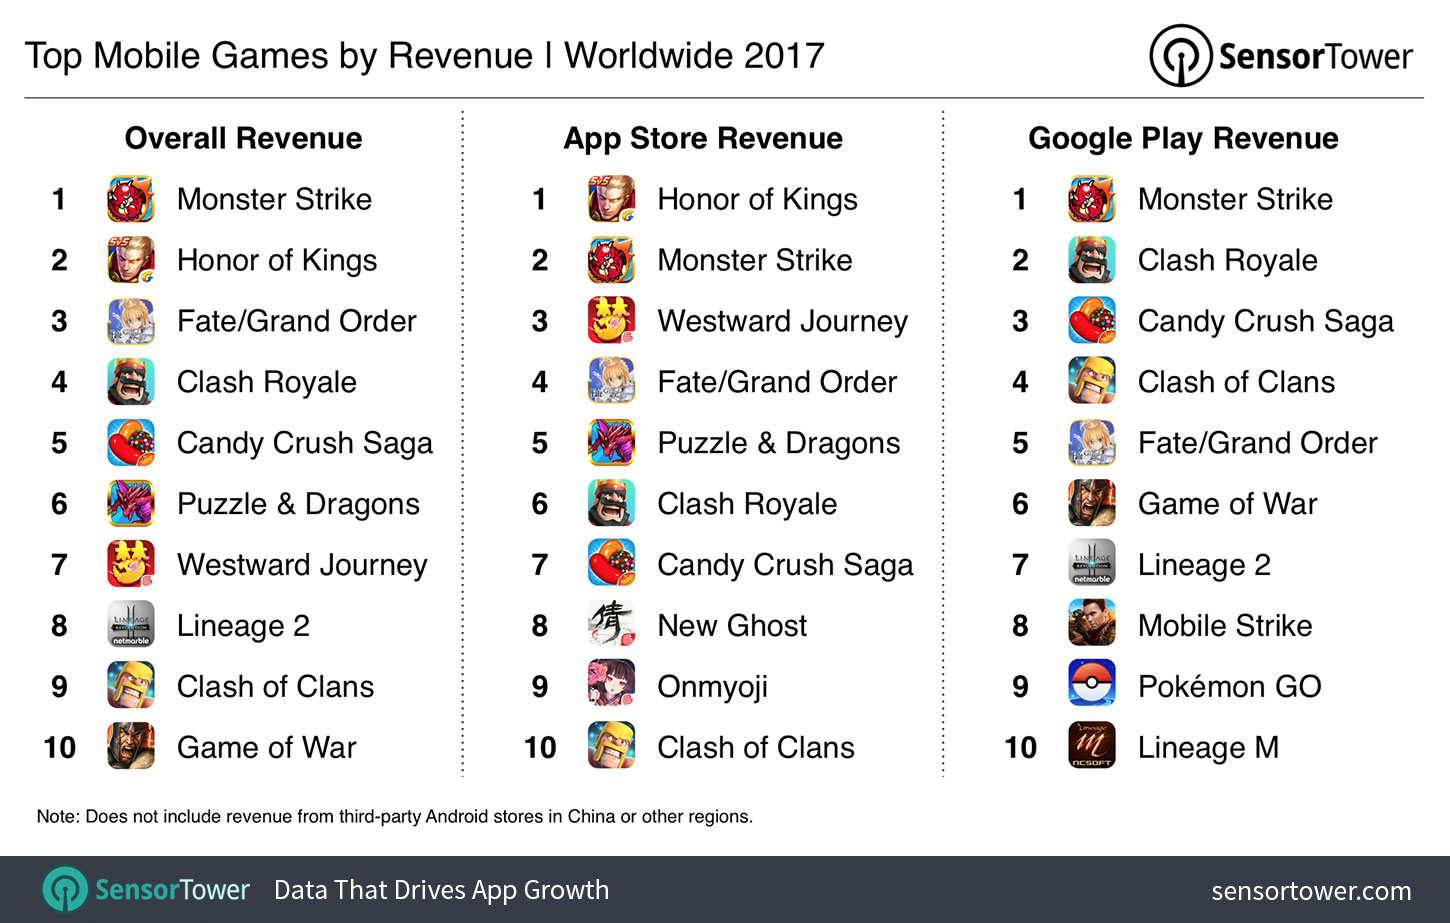 2017's Top Mobile Games by Revenue